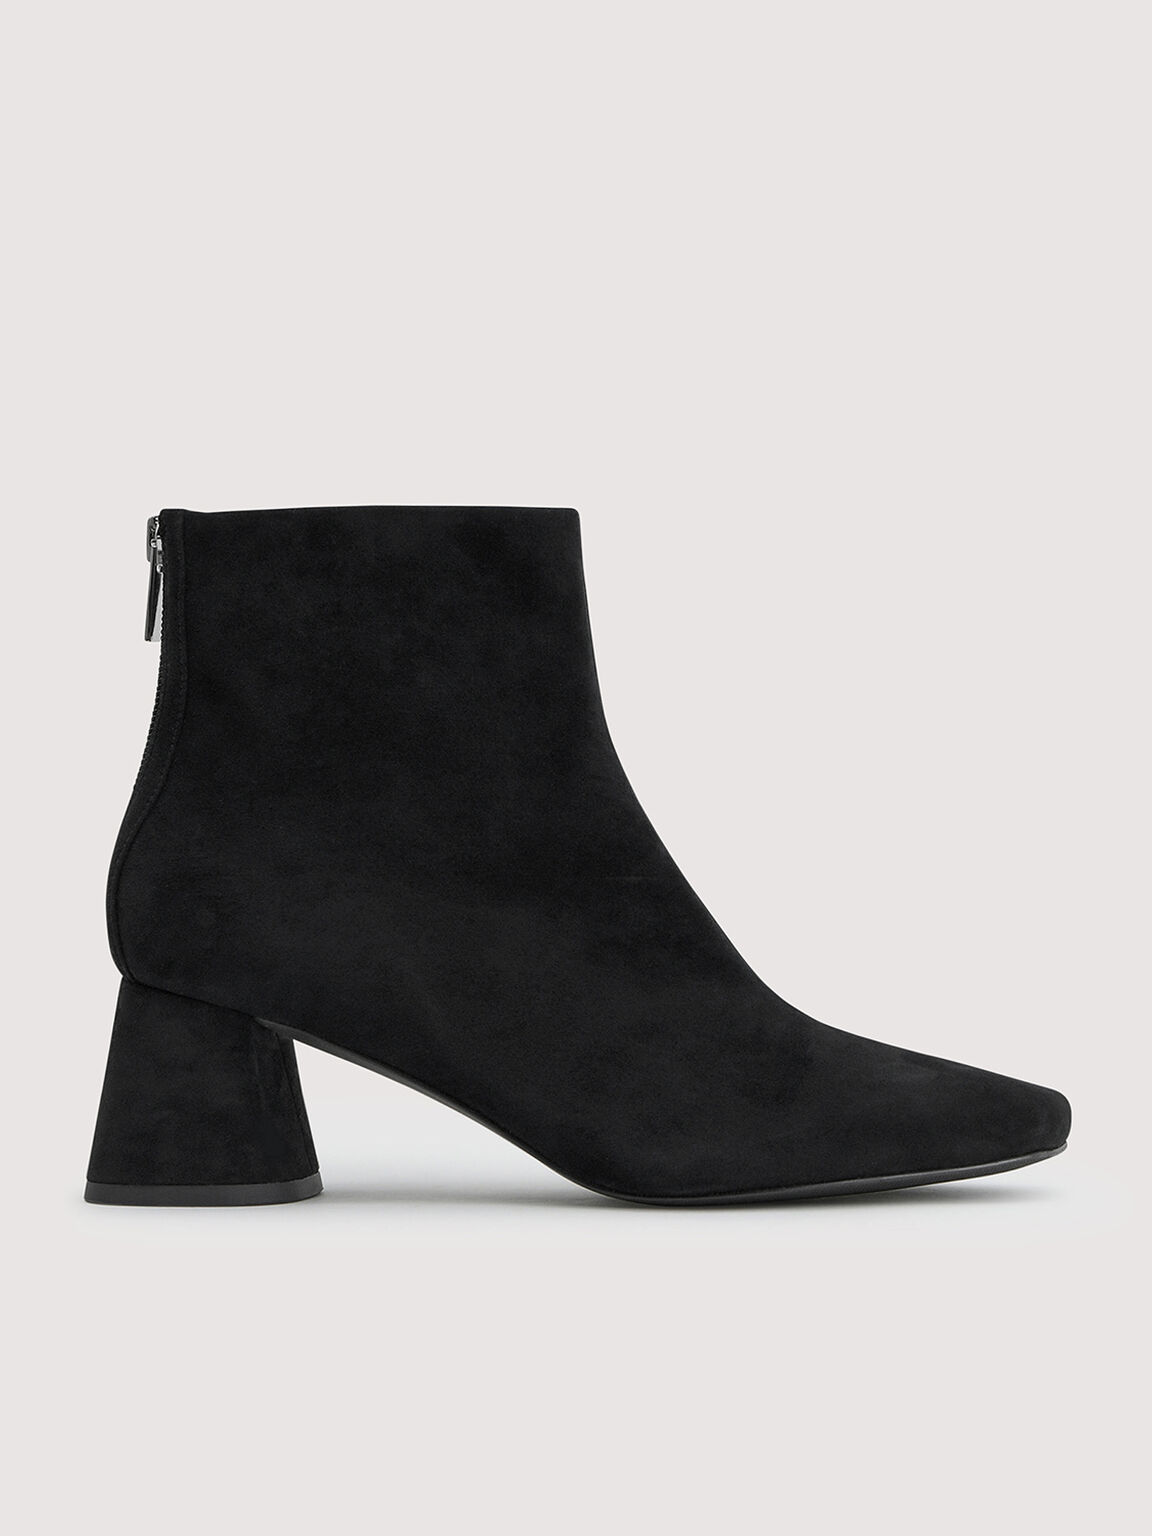 Suede Ankle Boots, Black